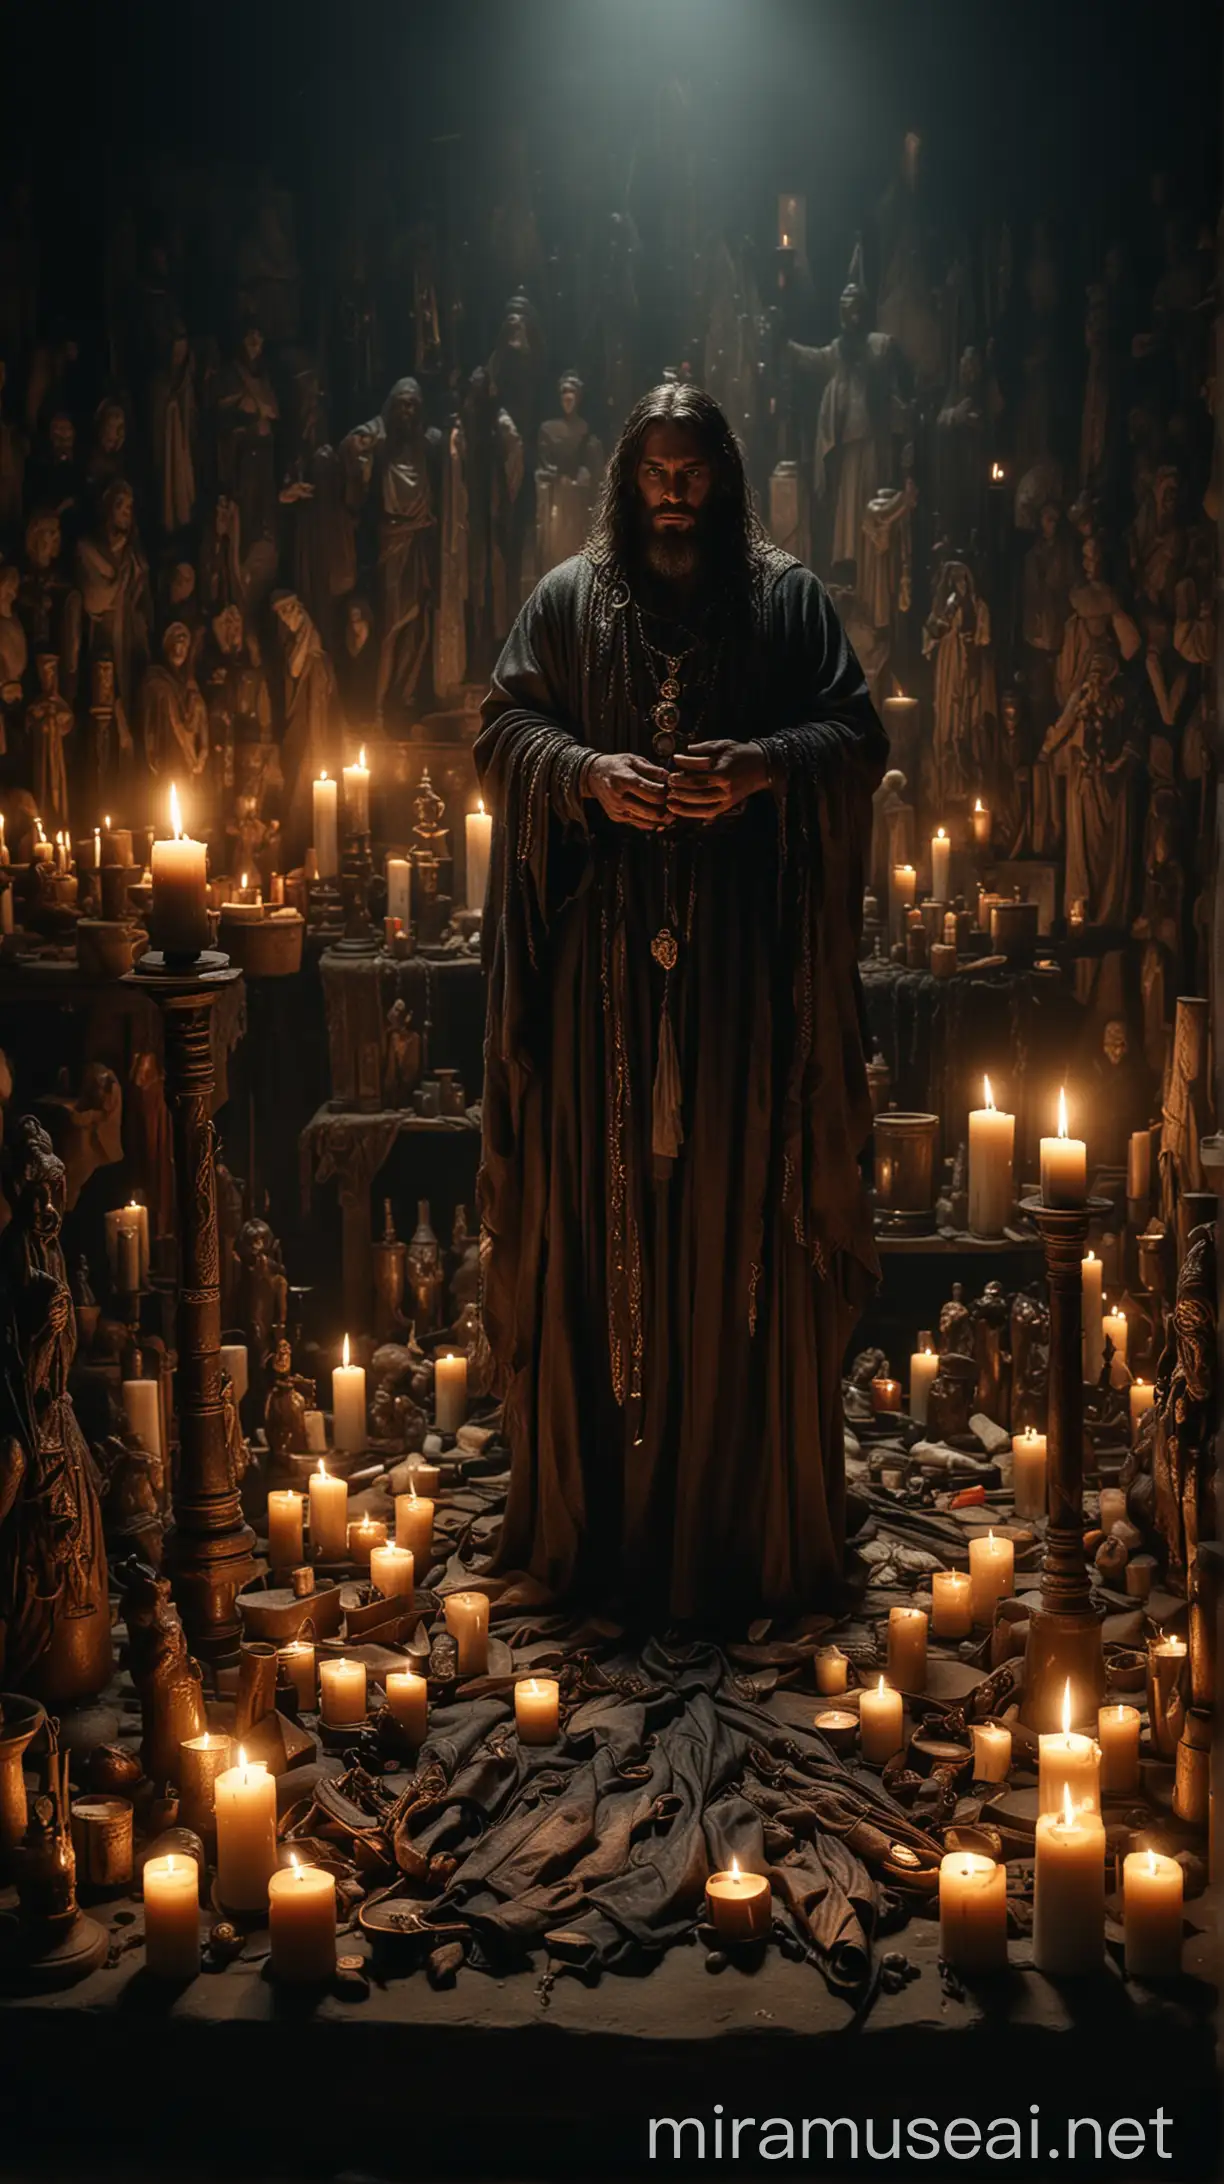 A darkened room with a figure of a sorcerer, Barjesus, standing in the center, surrounded by dimly lit candles and mysterious artifacts. The figure is dressed in ancient robes, with a hint of menace in its expression.in ancient world 